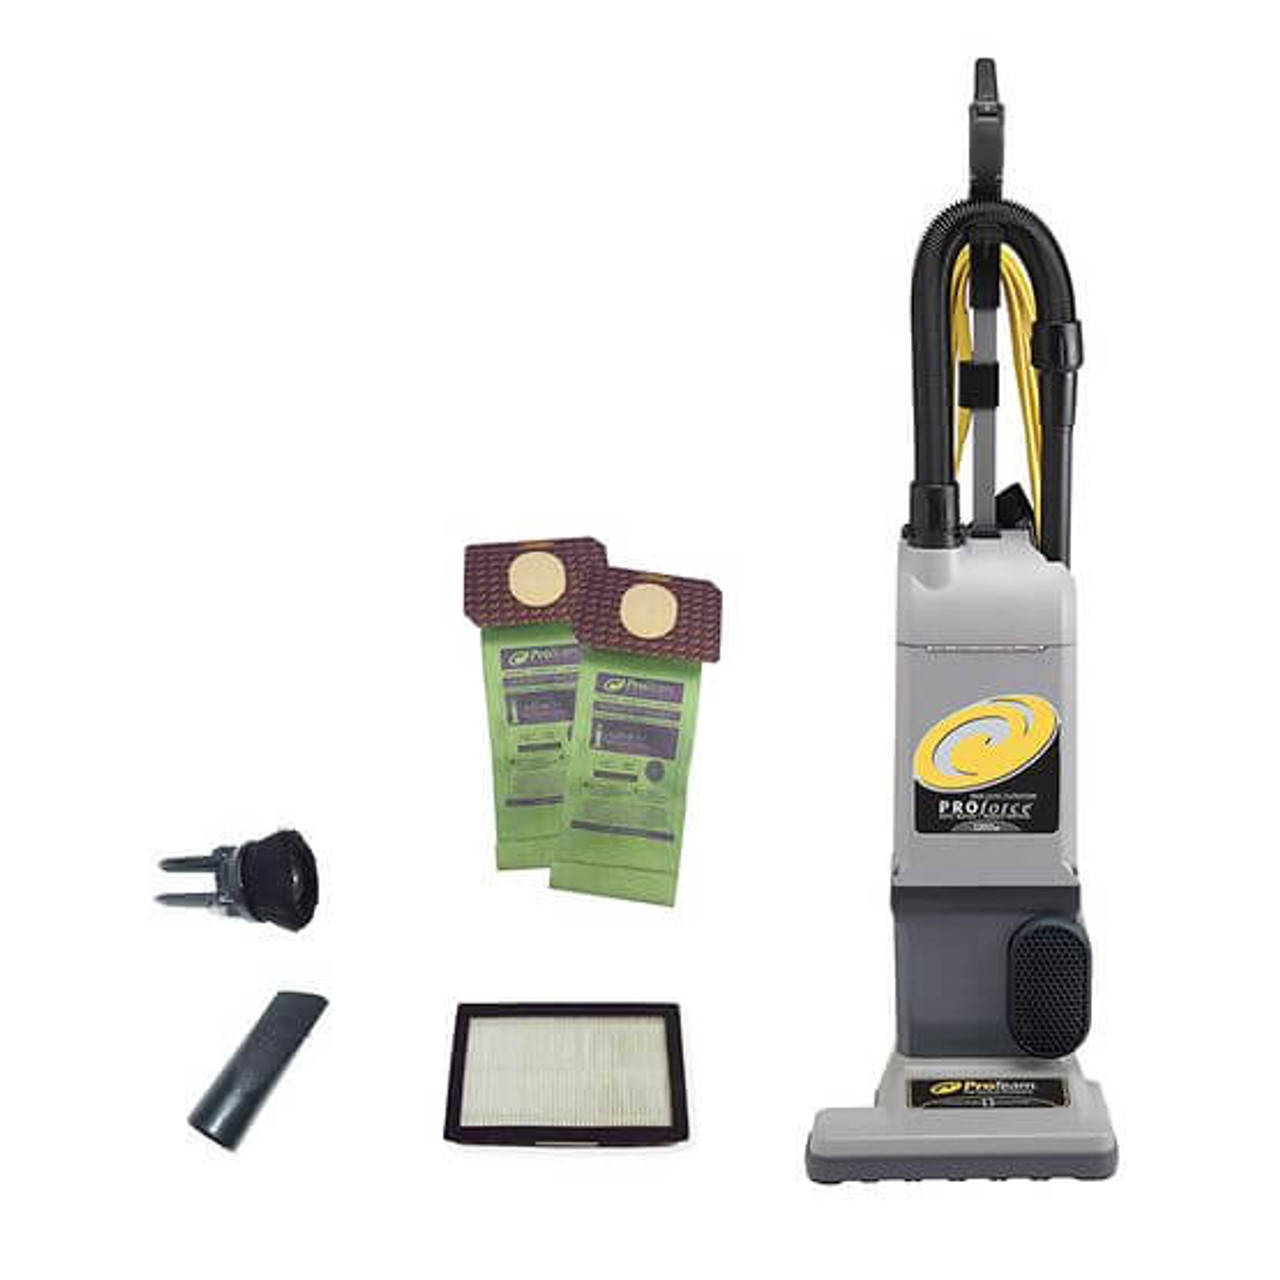 ProTeam ProForce 1200XP HEPA 12" Upright Vacuum Cleaner - 120V | Professional Cleaning Performance. CHICKEN PIECES.